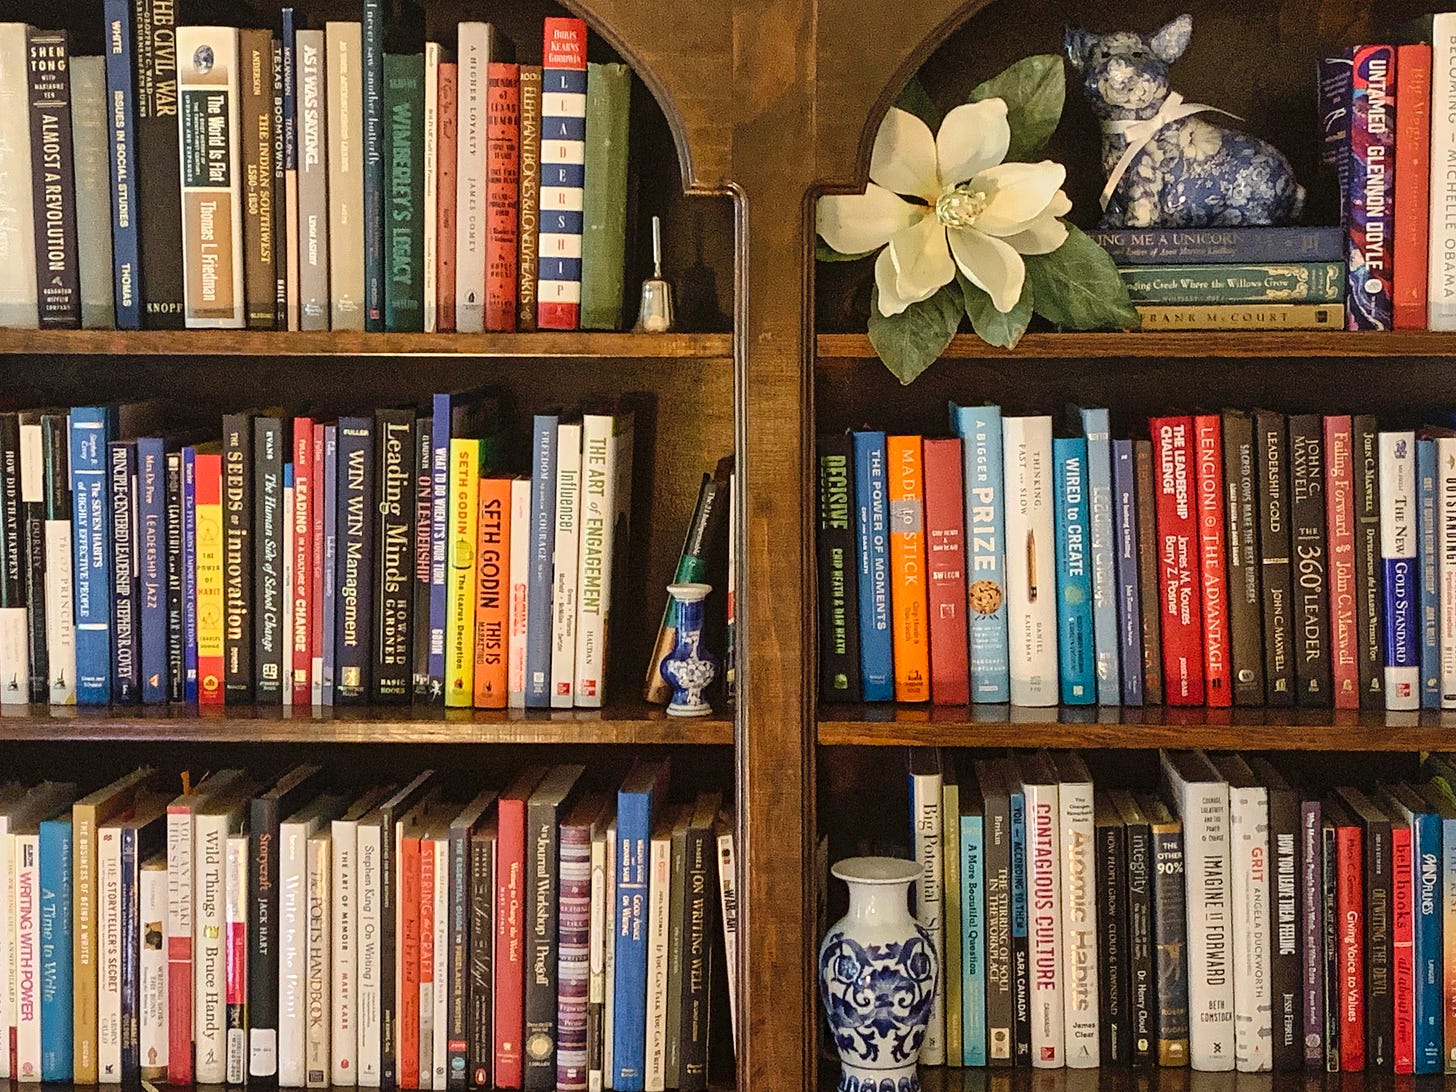 a book shelf with three rows of books and a few knick-knacks stuck in between